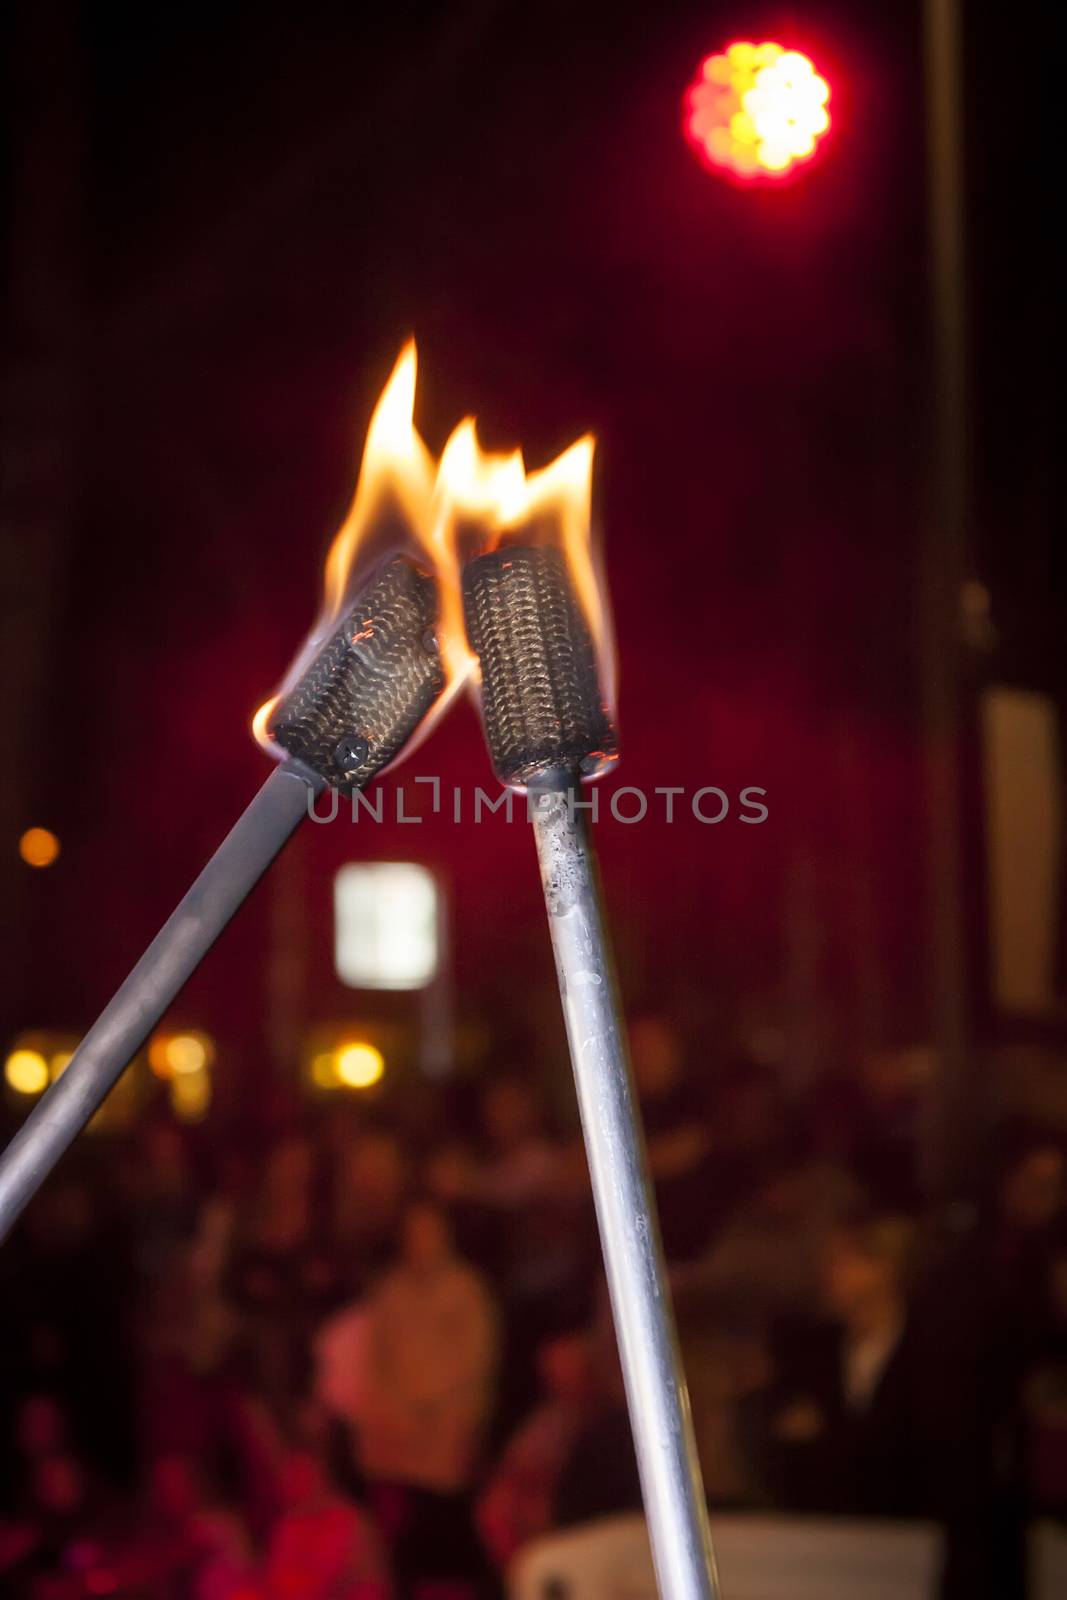 Torches burned with flames used by jugglers in a show